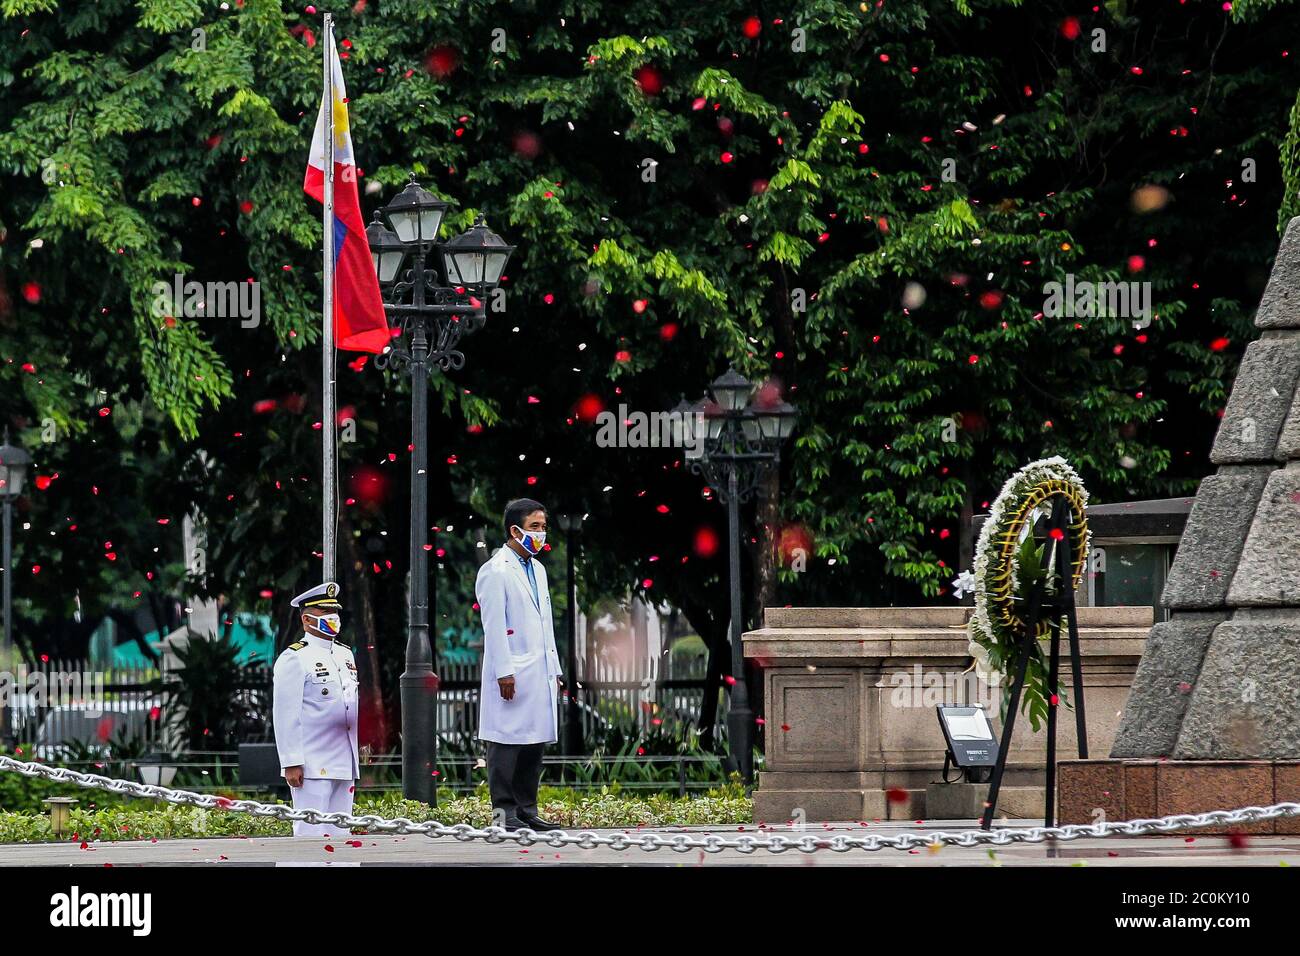 Manila 12th June Rose Petals And Confetti Rain Down During The Celebration Of The 122nd Philippine Independence Day In Manila The Philippines On June 12 The Philippines Celebrated The 122nd